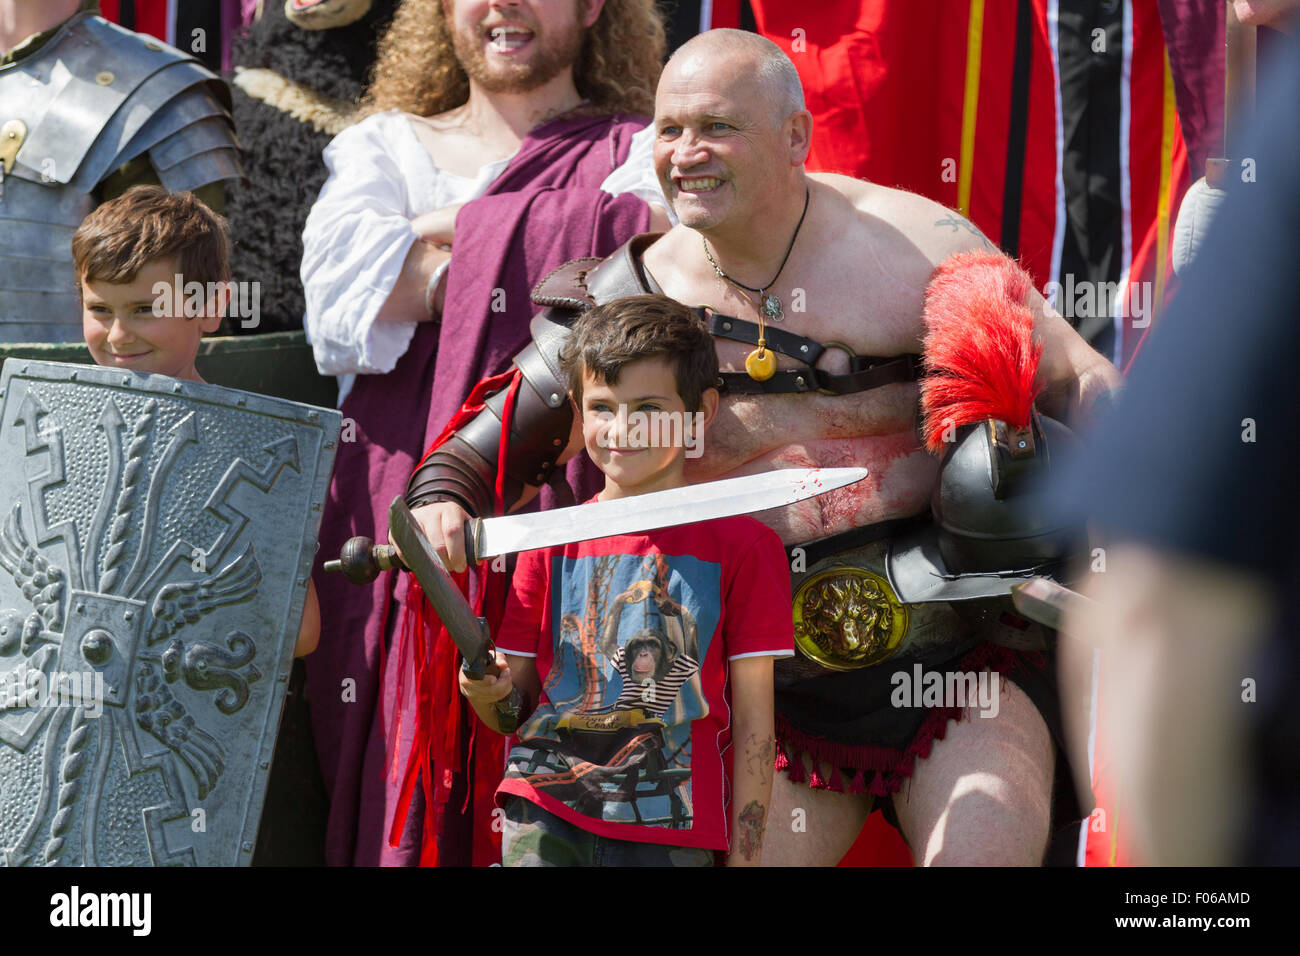 Wallsend, Tyne and Wear, UK. 8th August, 2015. Hadrian Festival at Segedunum Roman Fort: Two young boys pose with Roman Emperor Hadrian and Roman Gladiators. The Hadrian Festival is part of the programme of activities supporting the British Museum's Roman Empire: Power & People exhibition which is on public display 30 May – 13 September 2015 Credit:  Andrew Nicholson/Alamy Live News Stock Photo